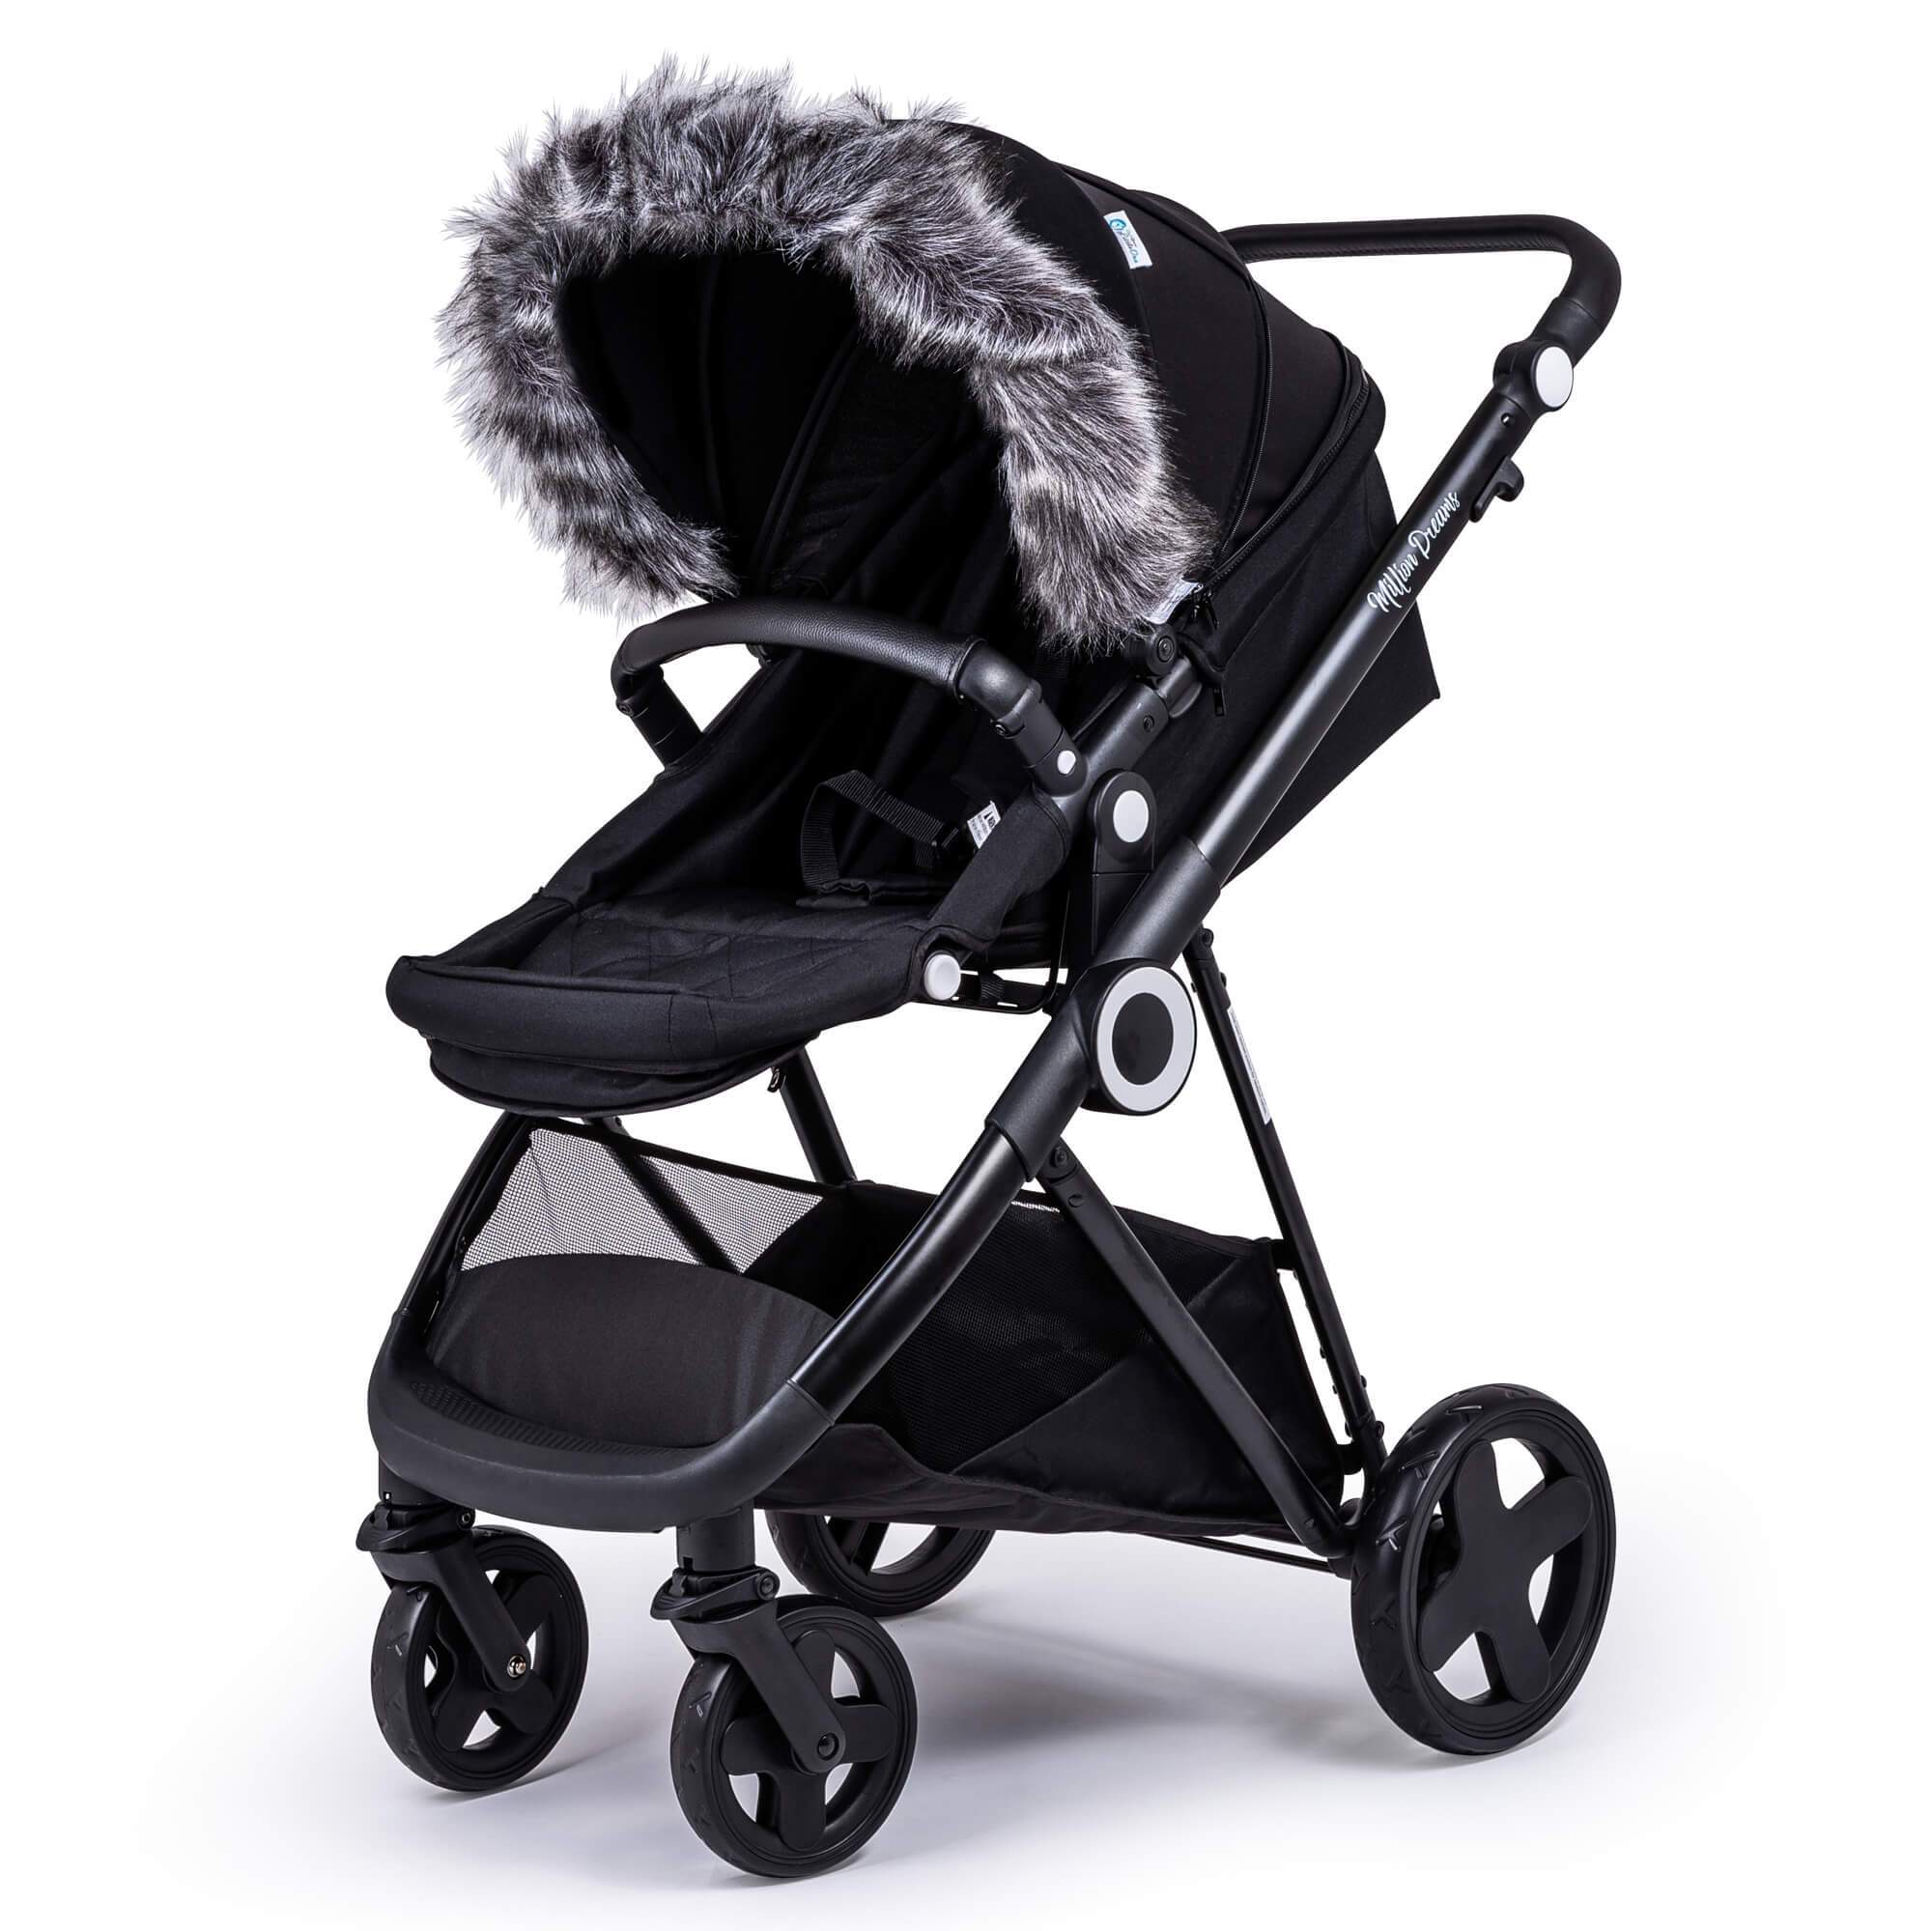 Pram Fur Hood Trim Attachment for Pushchair Compatible with Inglesina - For Your Little One